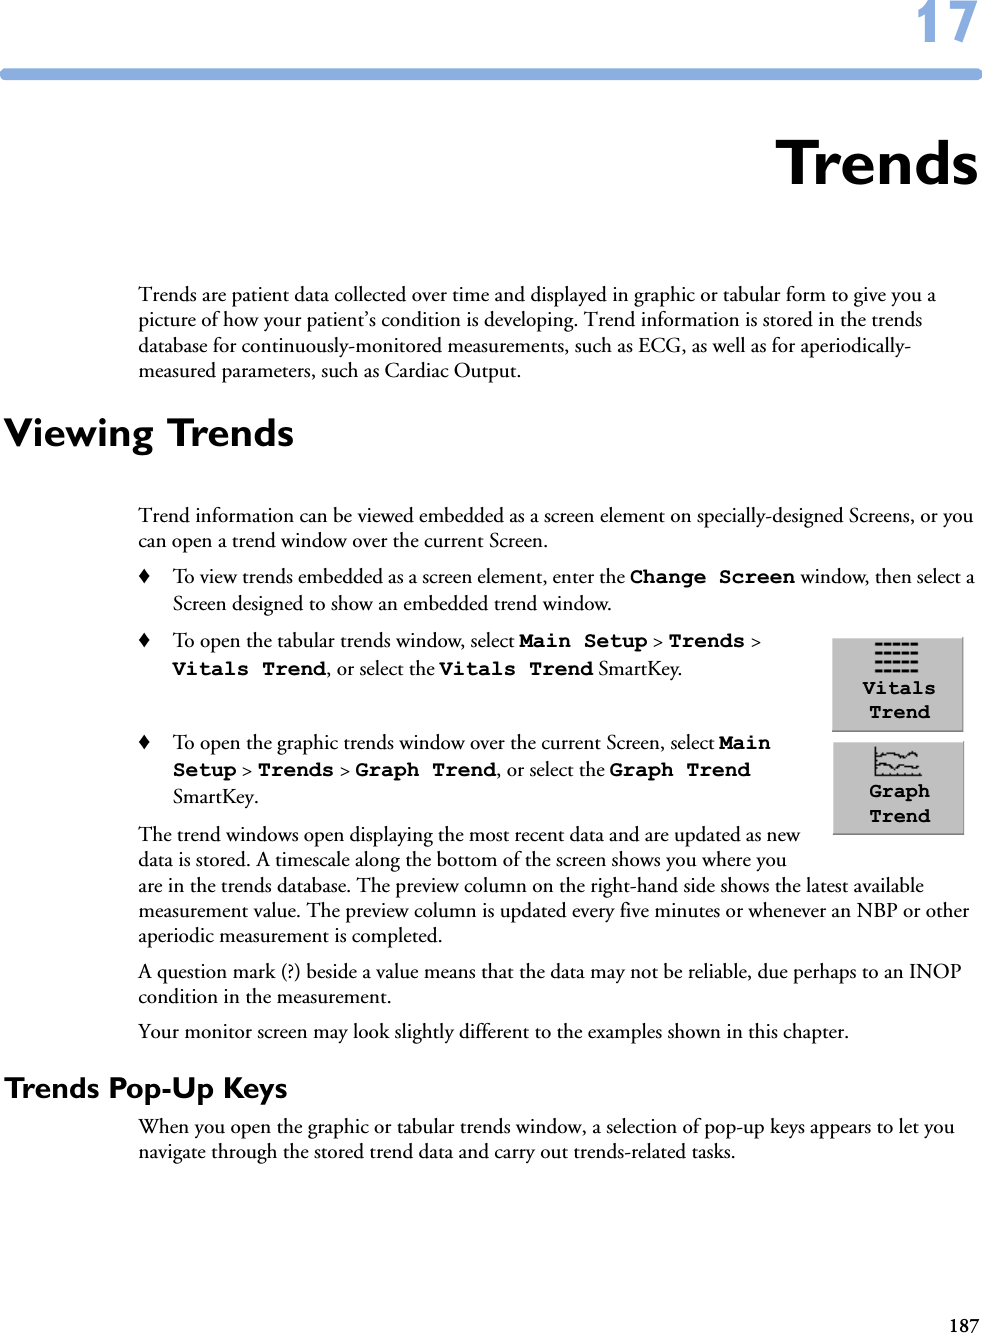 1871717TrendsTrends are patient data collected over time and displayed in graphic or tabular form to give you a picture of how your patient’s condition is developing. Trend information is stored in the trends database for continuously-monitored measurements, such as ECG, as well as for aperiodically-measured parameters, such as Cardiac Output.Viewing TrendsTrend information can be viewed embedded as a screen element on specially-designed Screens, or you can open a trend window over the current Screen. ♦To view trends embedded as a screen element, enter the Change Screen window, then select a Screen designed to show an embedded trend window.♦To open the tabular trends window, select Main Setup &gt; Trends &gt; Vitals Trend, or select the Vitals Trend SmartKey. ♦To open the graphic trends window over the current Screen, select Main Setup &gt; Trends &gt; Graph Trend, or select the Graph Trend SmartKey.The trend windows open displaying the most recent data and are updated as new data is stored. A timescale along the bottom of the screen shows you where you are in the trends database. The preview column on the right-hand side shows the latest available measurement value. The preview column is updated every five minutes or whenever an NBP or other aperiodic measurement is completed. A question mark (?) beside a value means that the data may not be reliable, due perhaps to an INOP condition in the measurement. Your monitor screen may look slightly different to the examples shown in this chapter.Trends Pop-Up KeysWhen you open the graphic or tabular trends window, a selection of pop-up keys appears to let you navigate through the stored trend data and carry out trends-related tasks.Vitals TrendGraph Trend